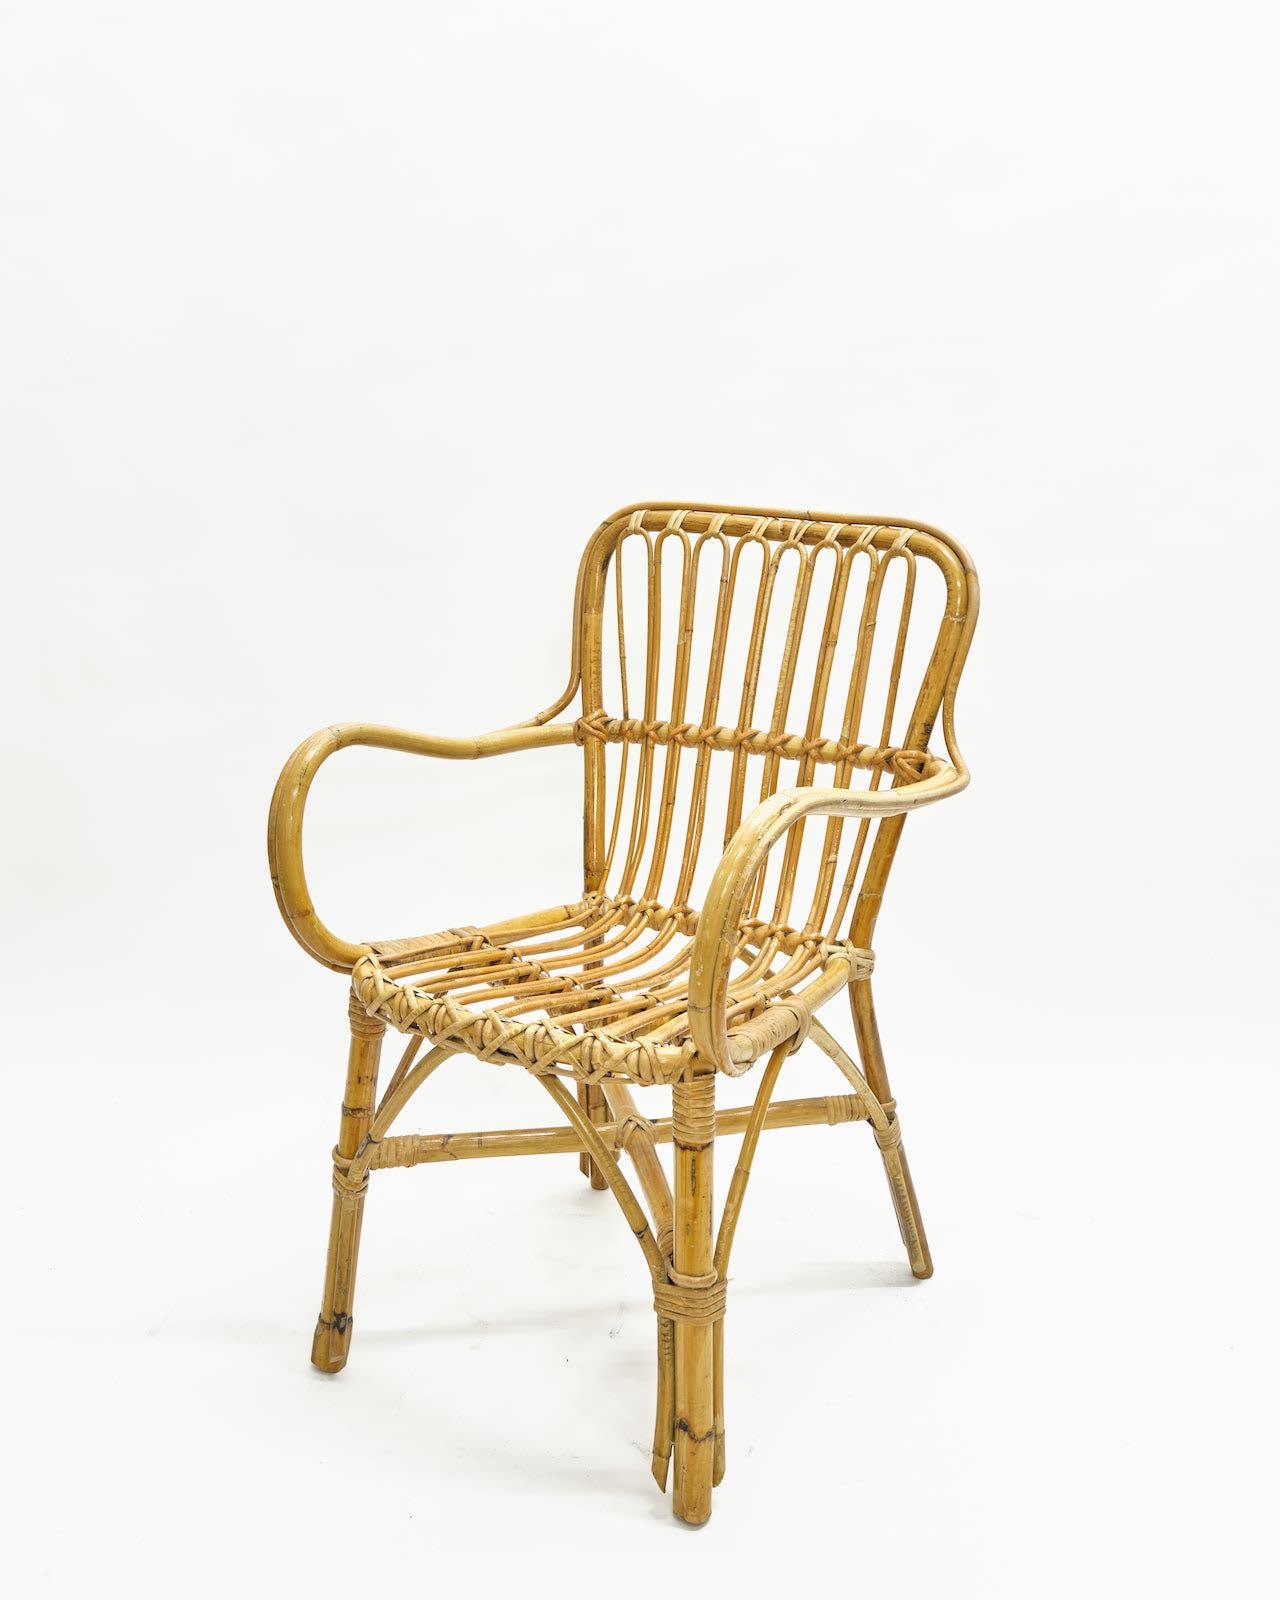 Midcentury French armchair made up of cane, circa 1950s.

Dimensions: H80 x W53 x D53 cm.